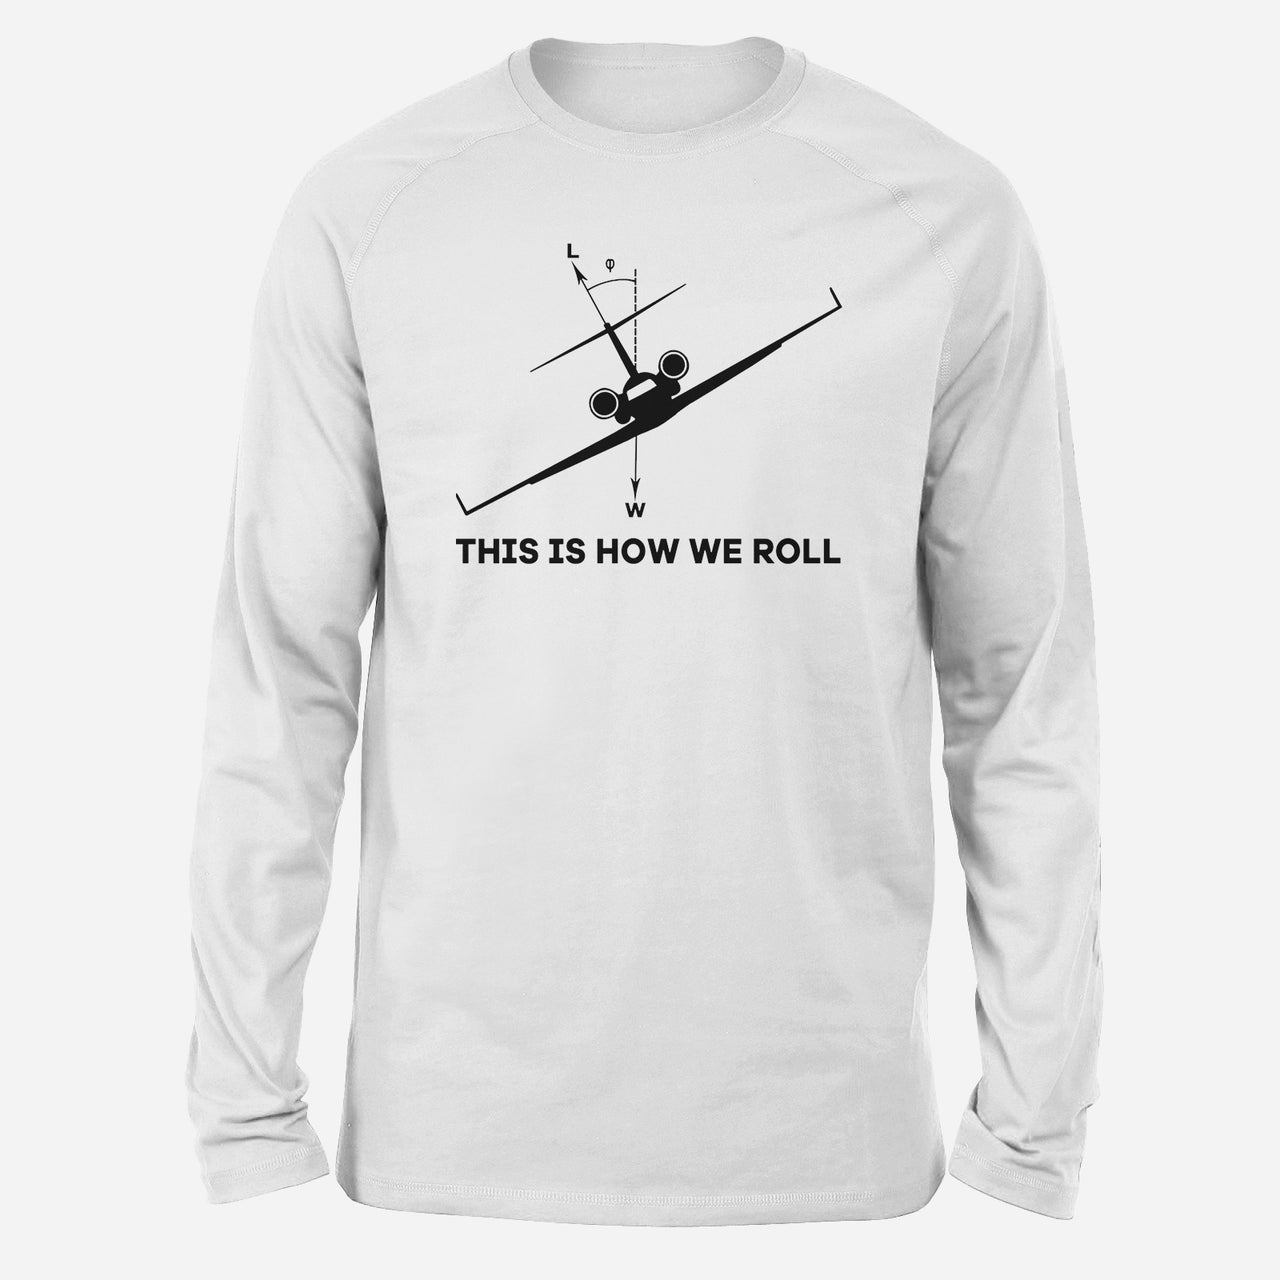 This is How We Roll Designed Long-Sleeve T-Shirts